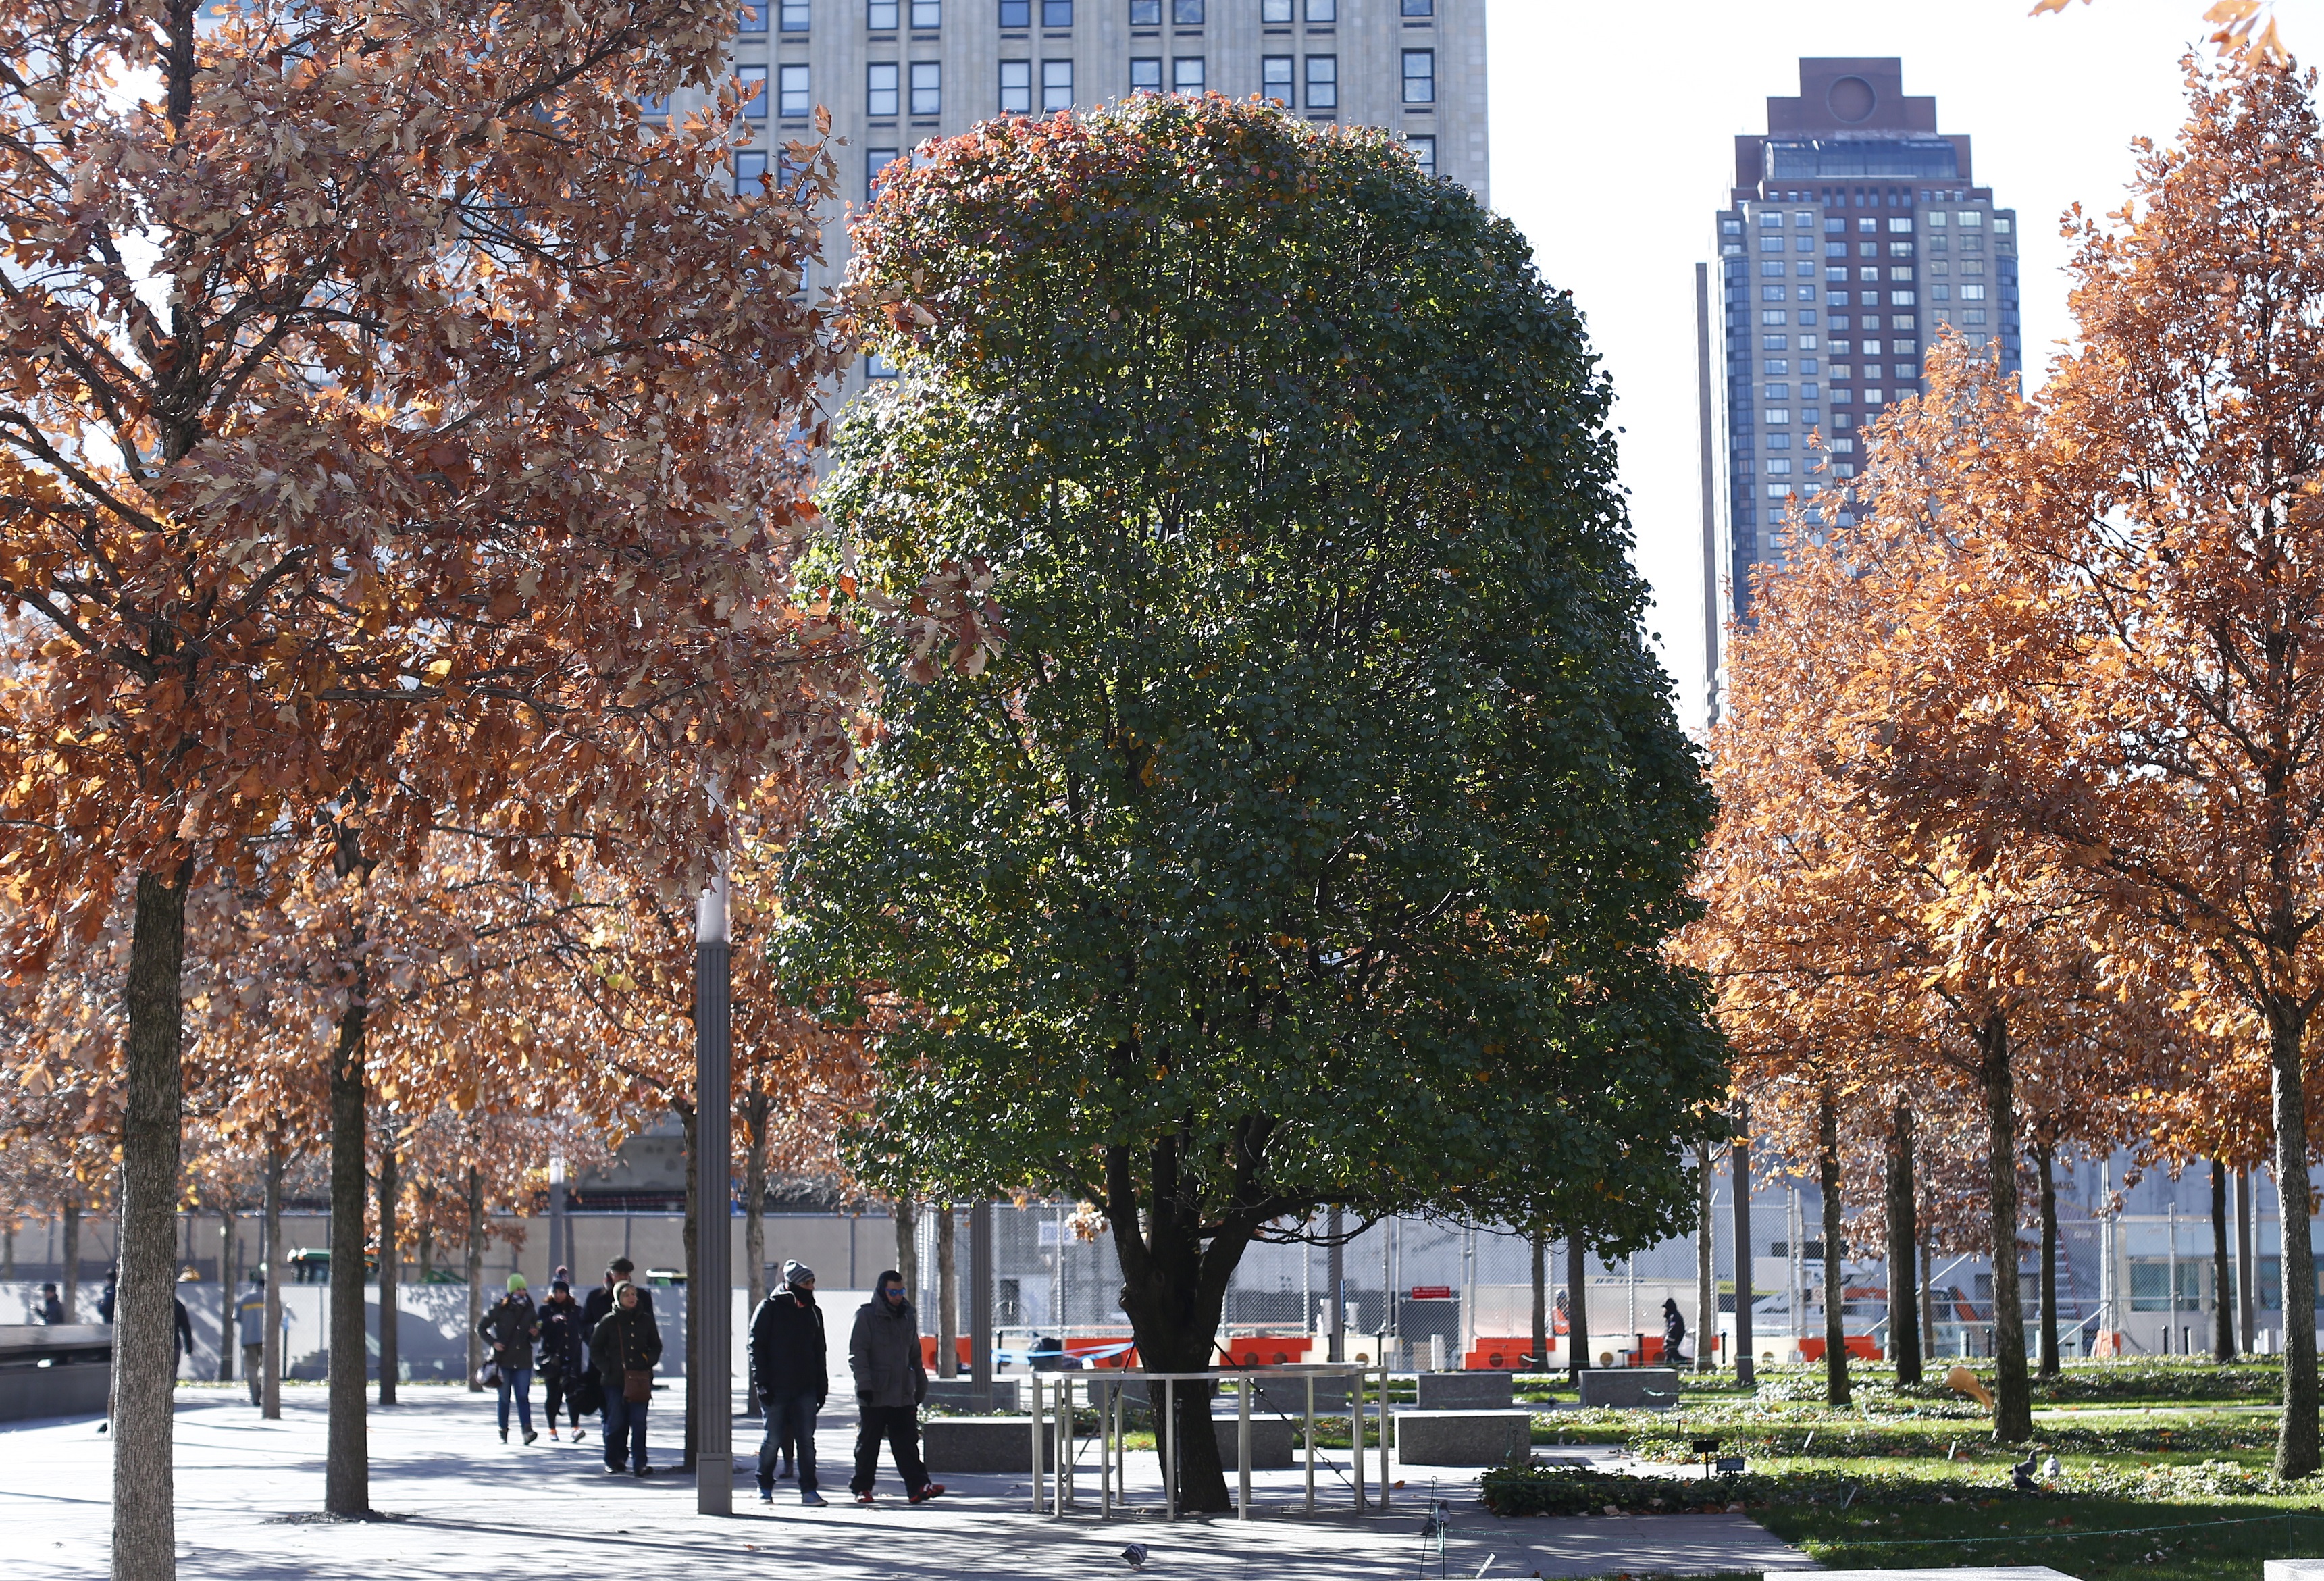 The green leaves of the Survivor Tree contrast against the orange leaves of surrounding swamp white oaks as several visitors walk by on Memorial plaza.